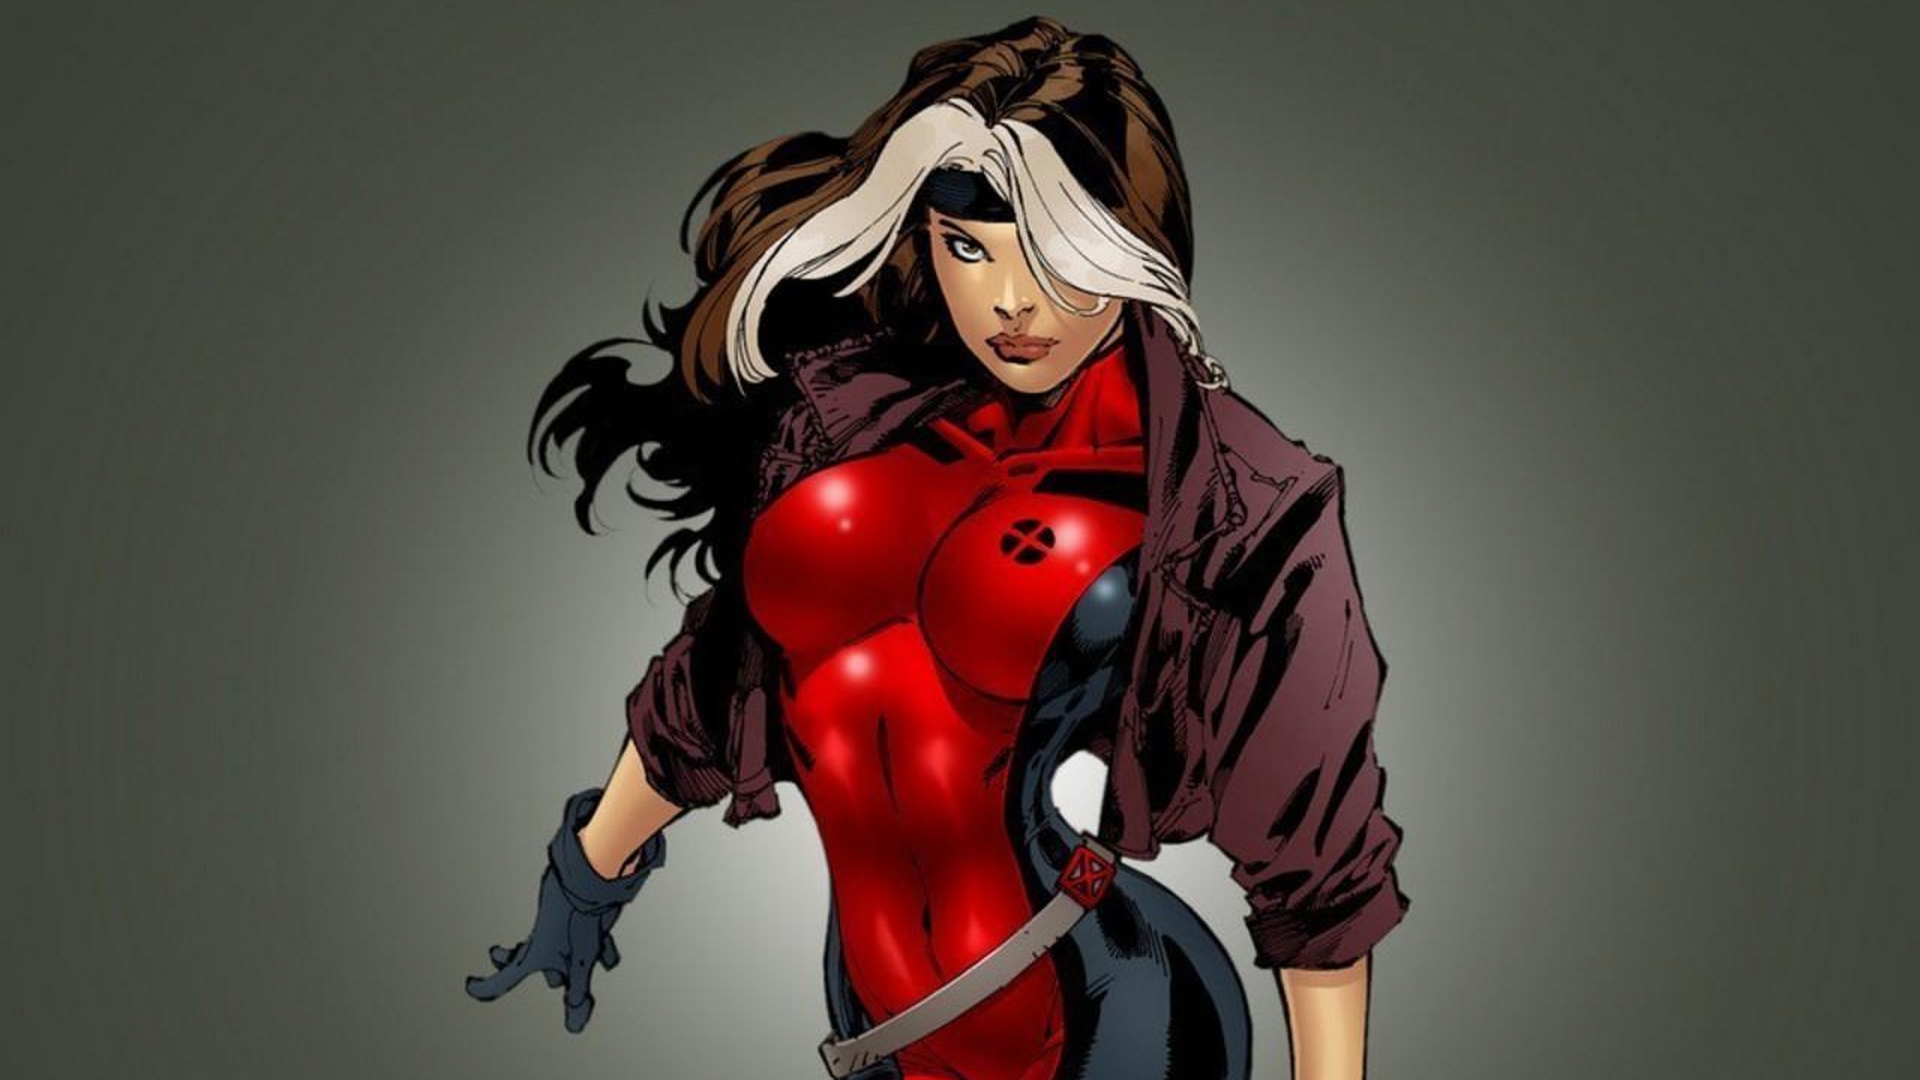 Digital artwork featuring the iconic character Rogue from Marvel Comics.